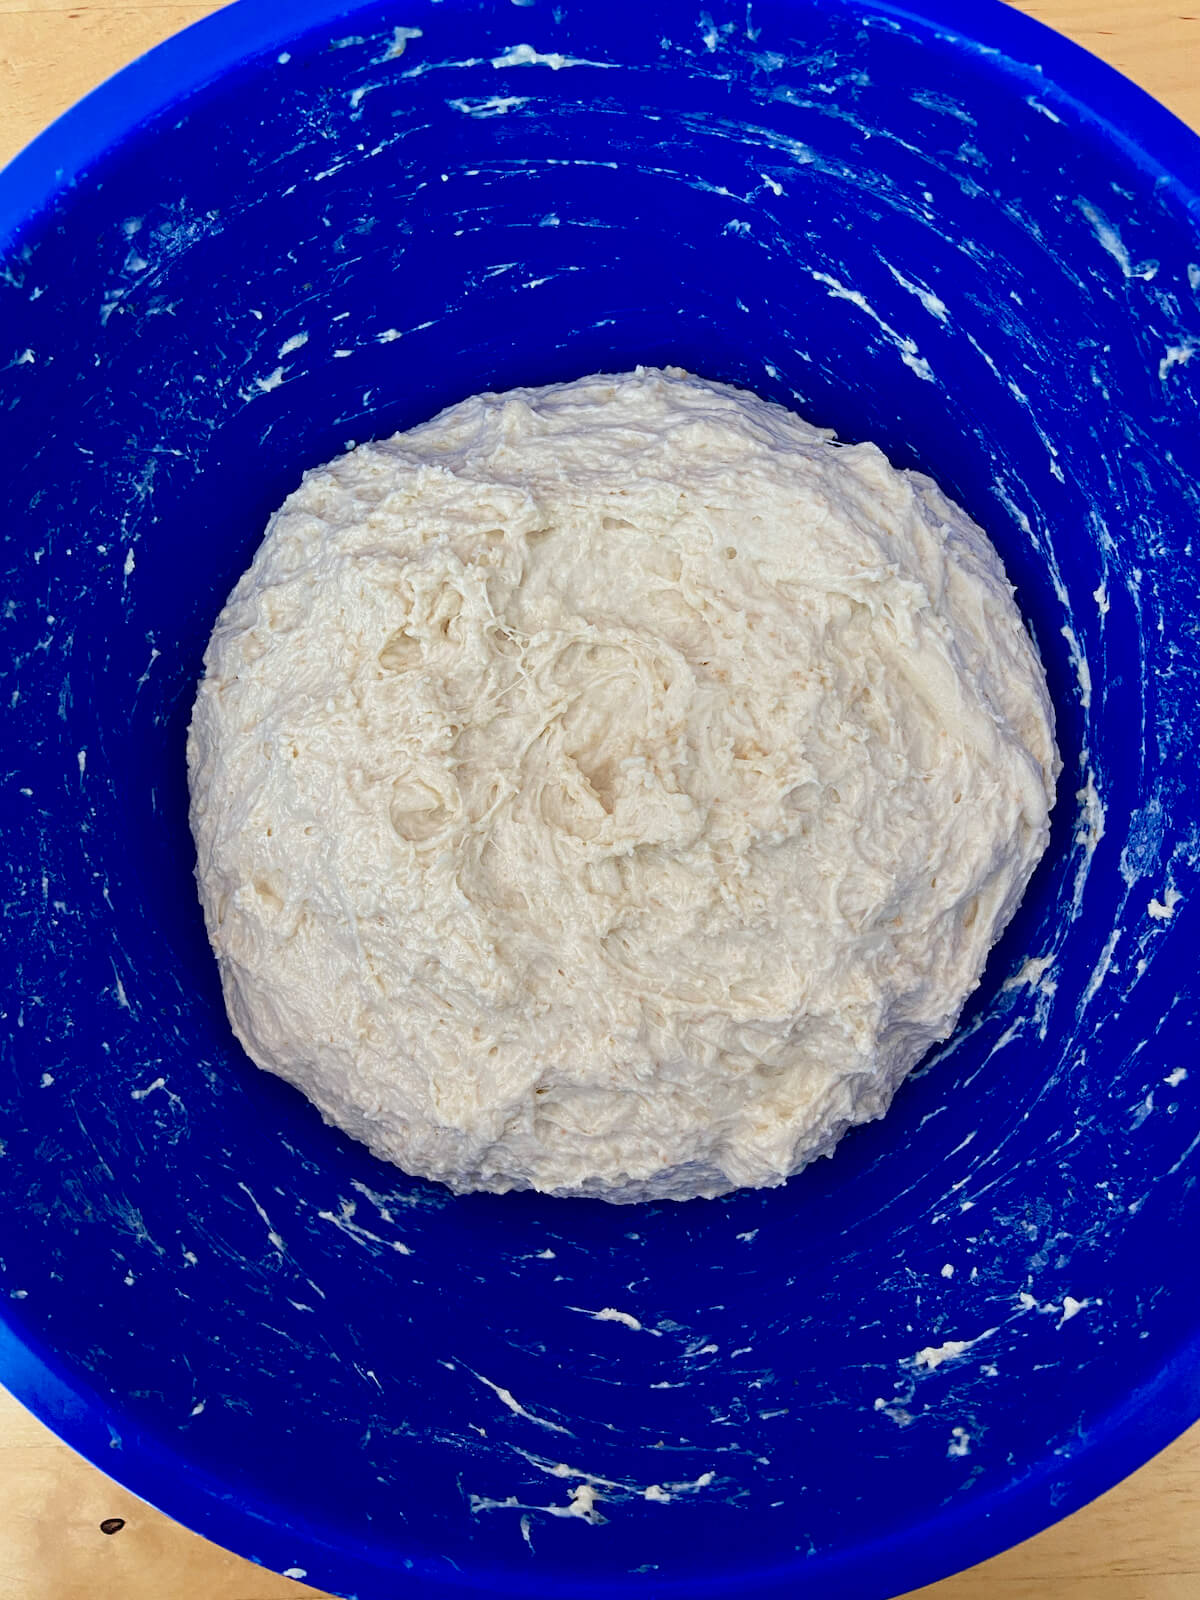 The mixed dough in a blue mixing bowl.